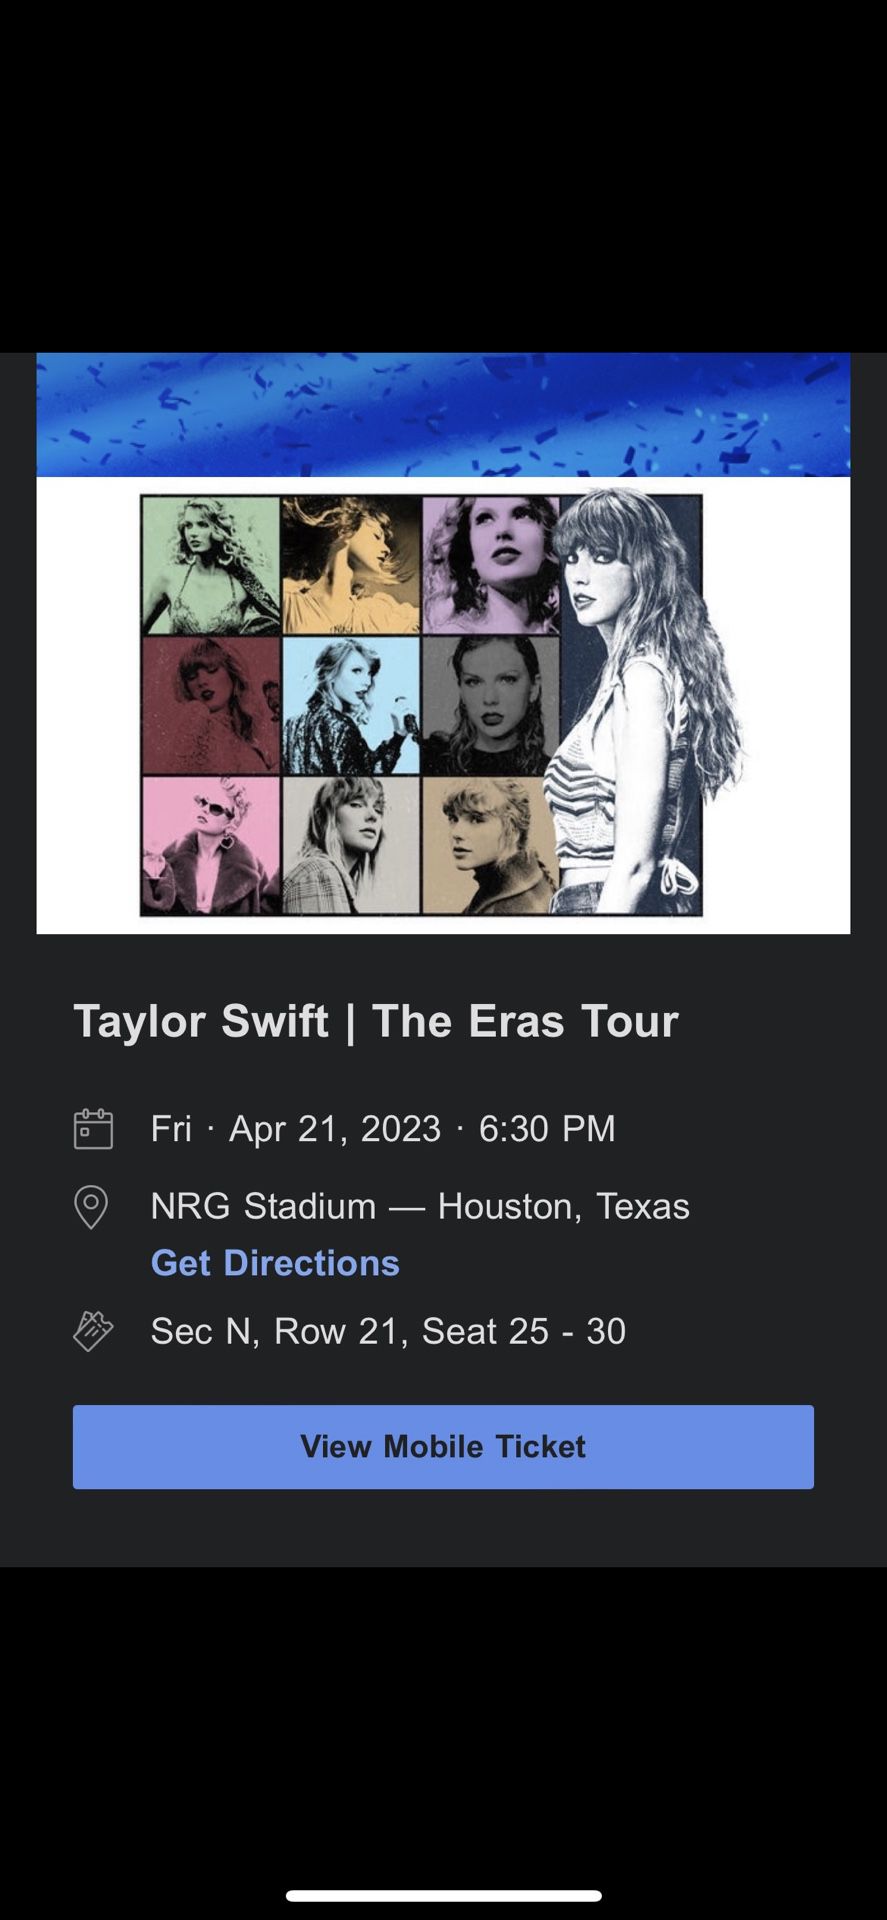 Taylor Swift Tickets (4 Floor Section N)